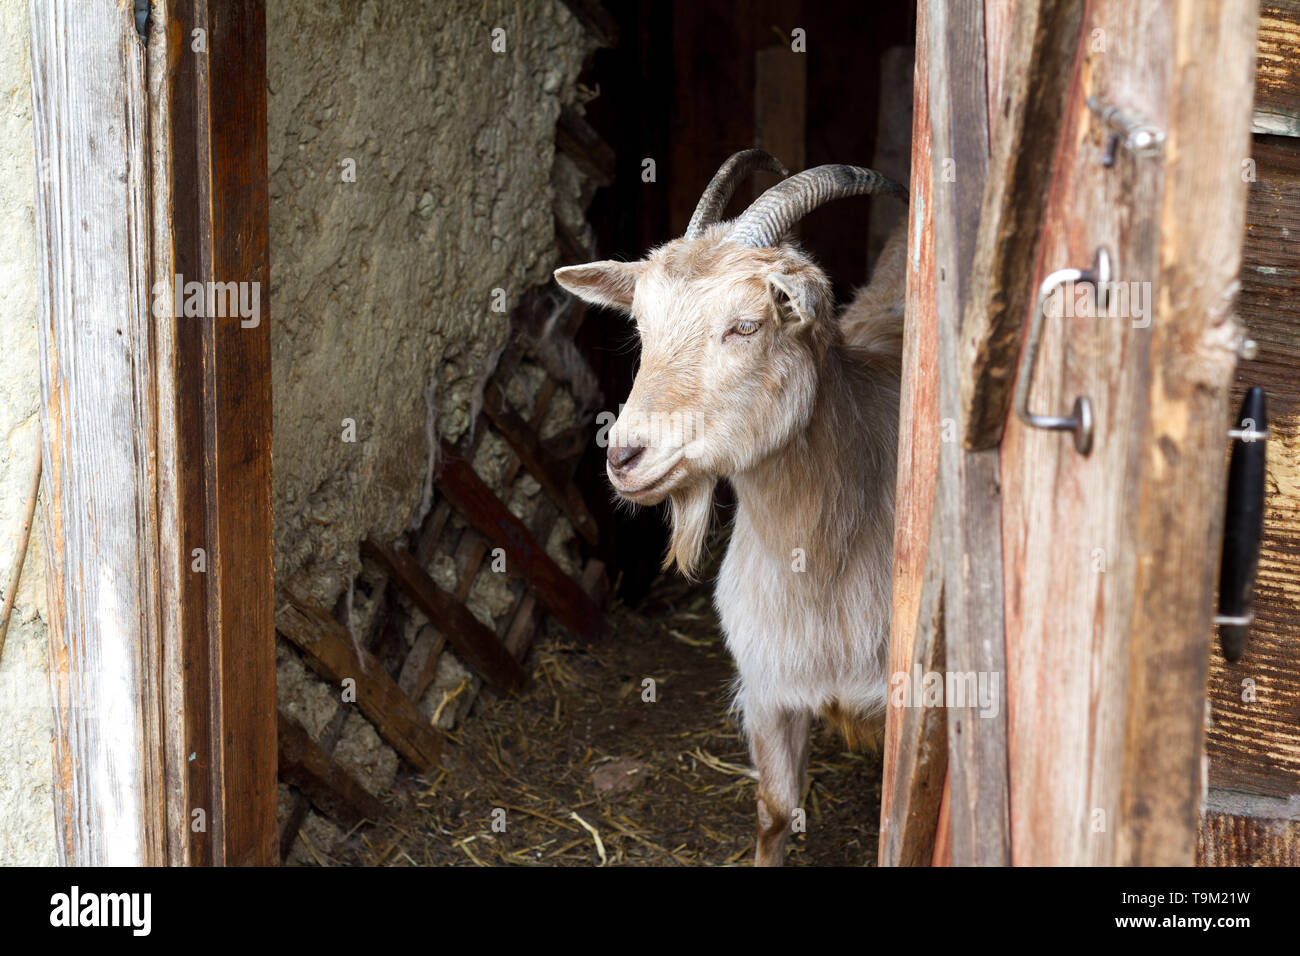 Adult white goat with twisted horns looks out of the doors of the barn, life on the farm, ecotourism Stock Photo